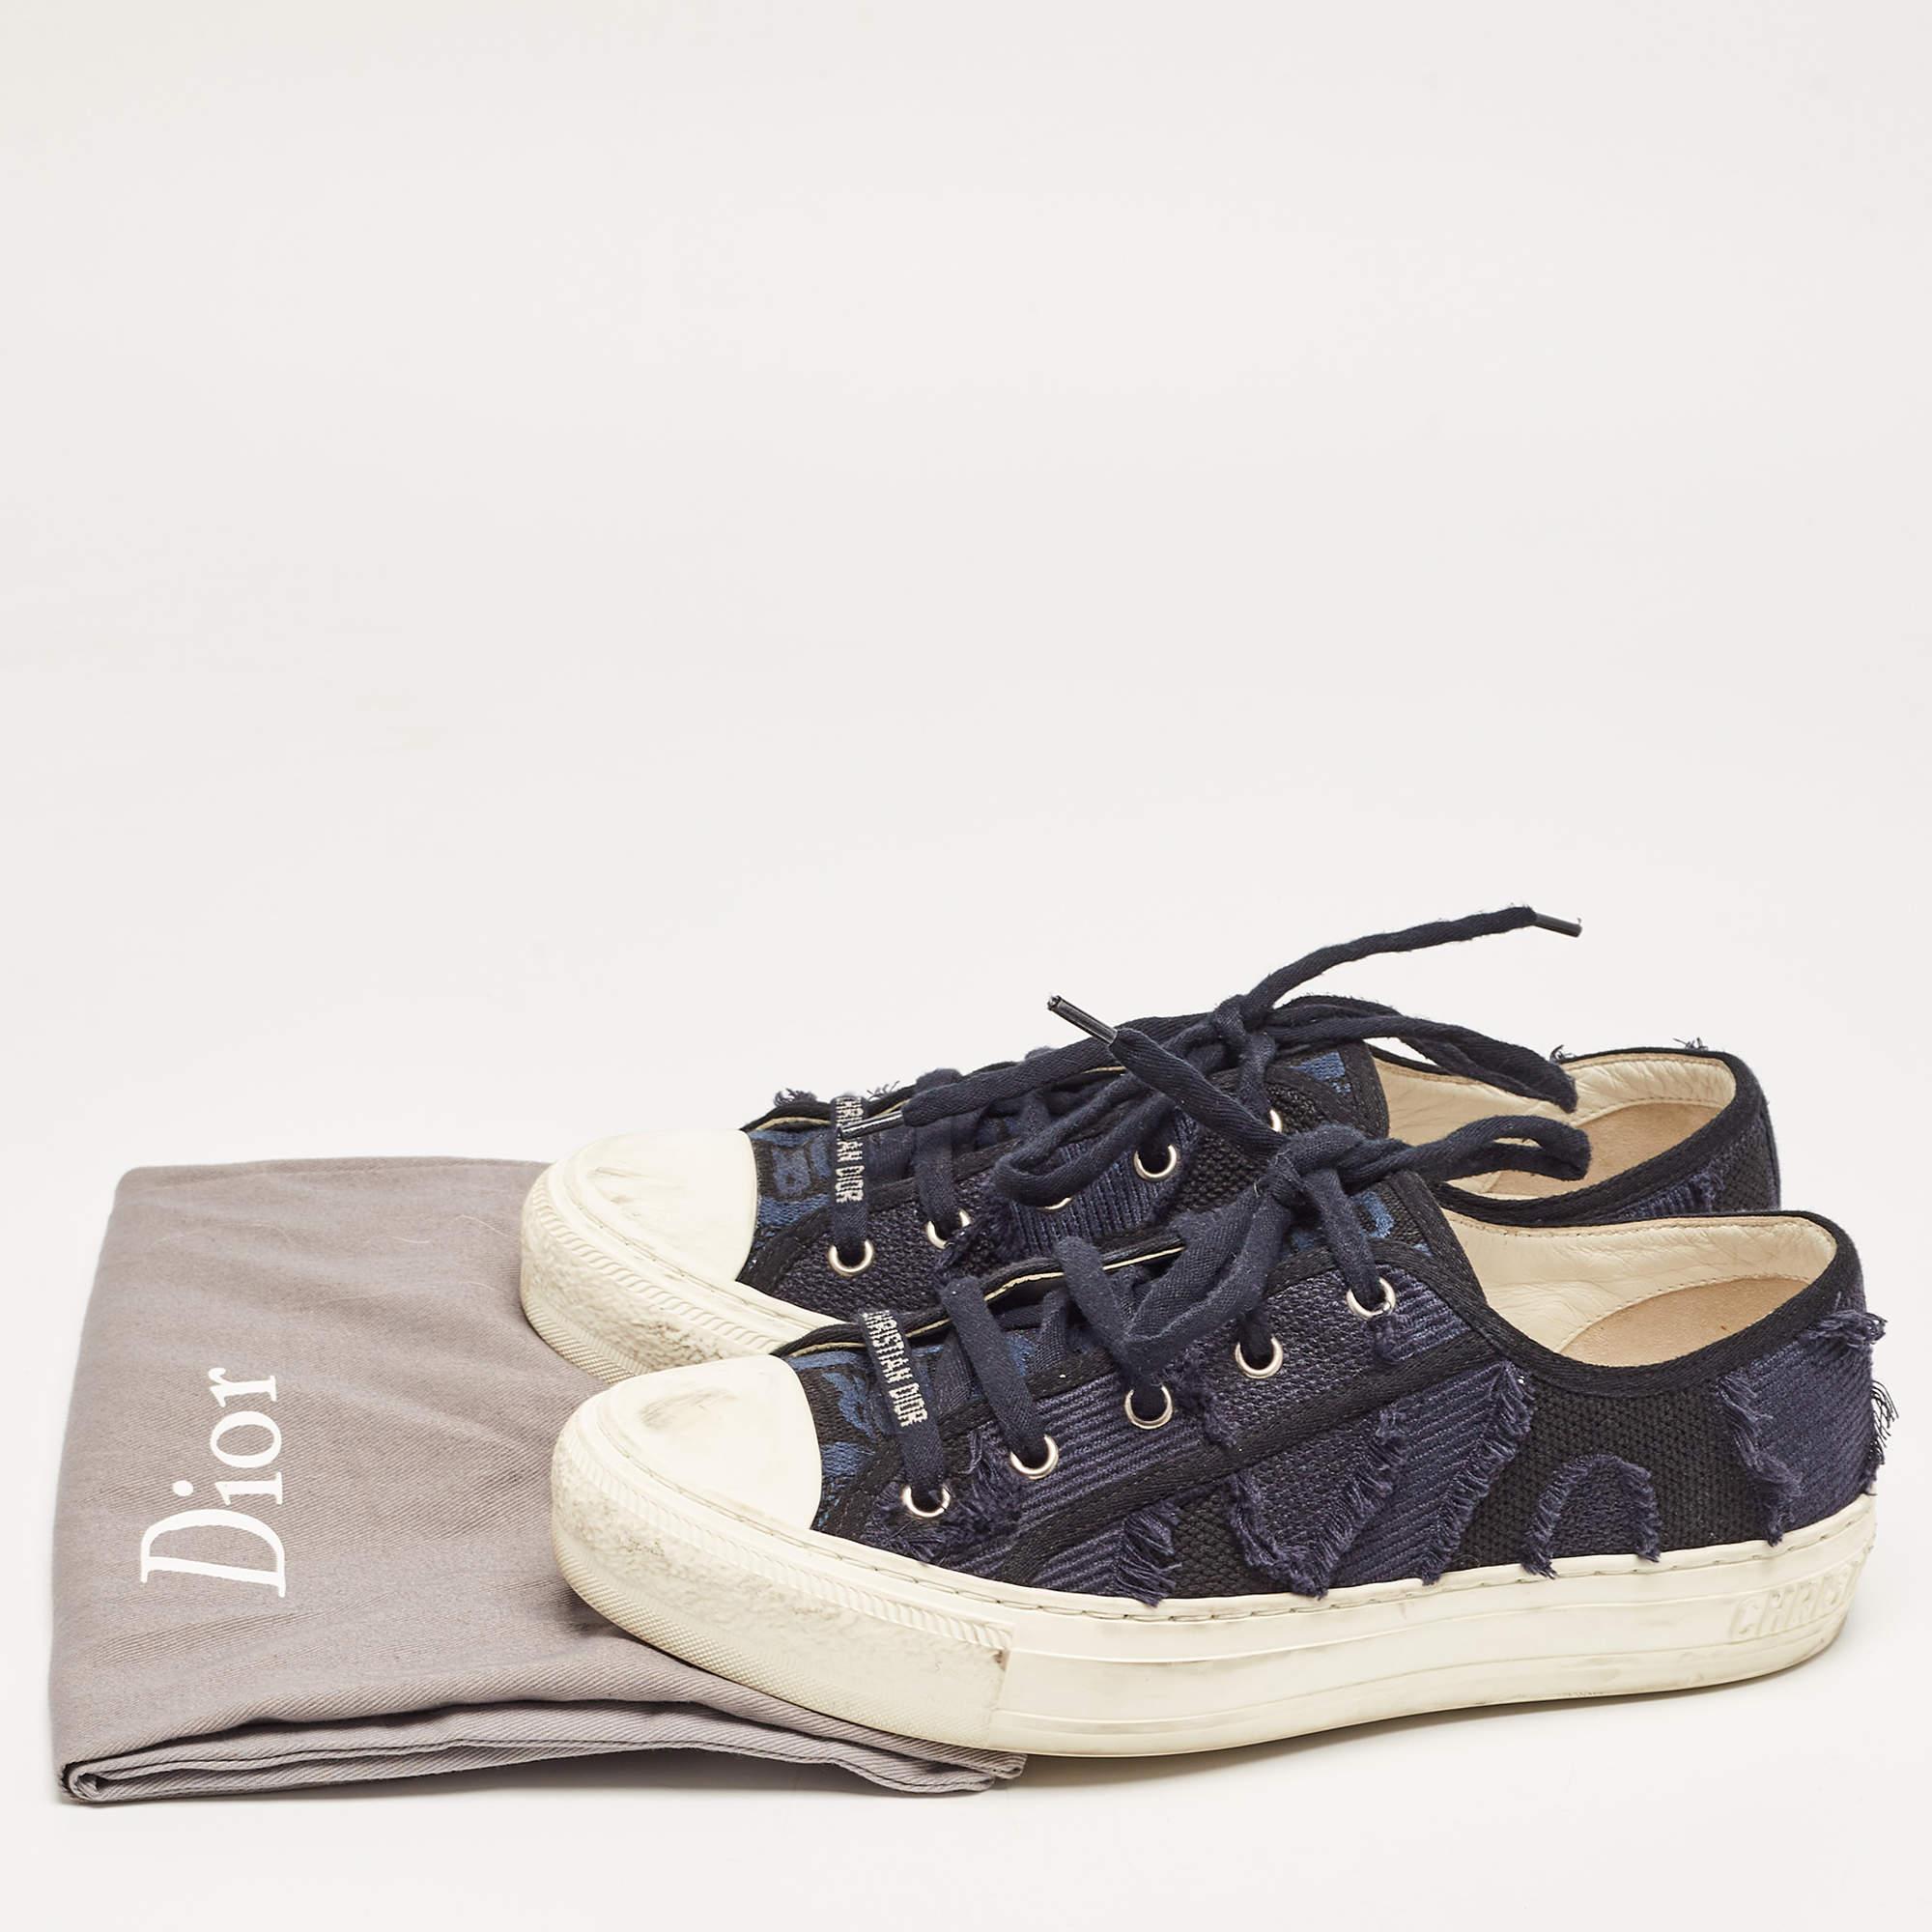 Dior Navy Blue Canvas Walk'N'Dior Low Top Sneakers Size 38.5 5